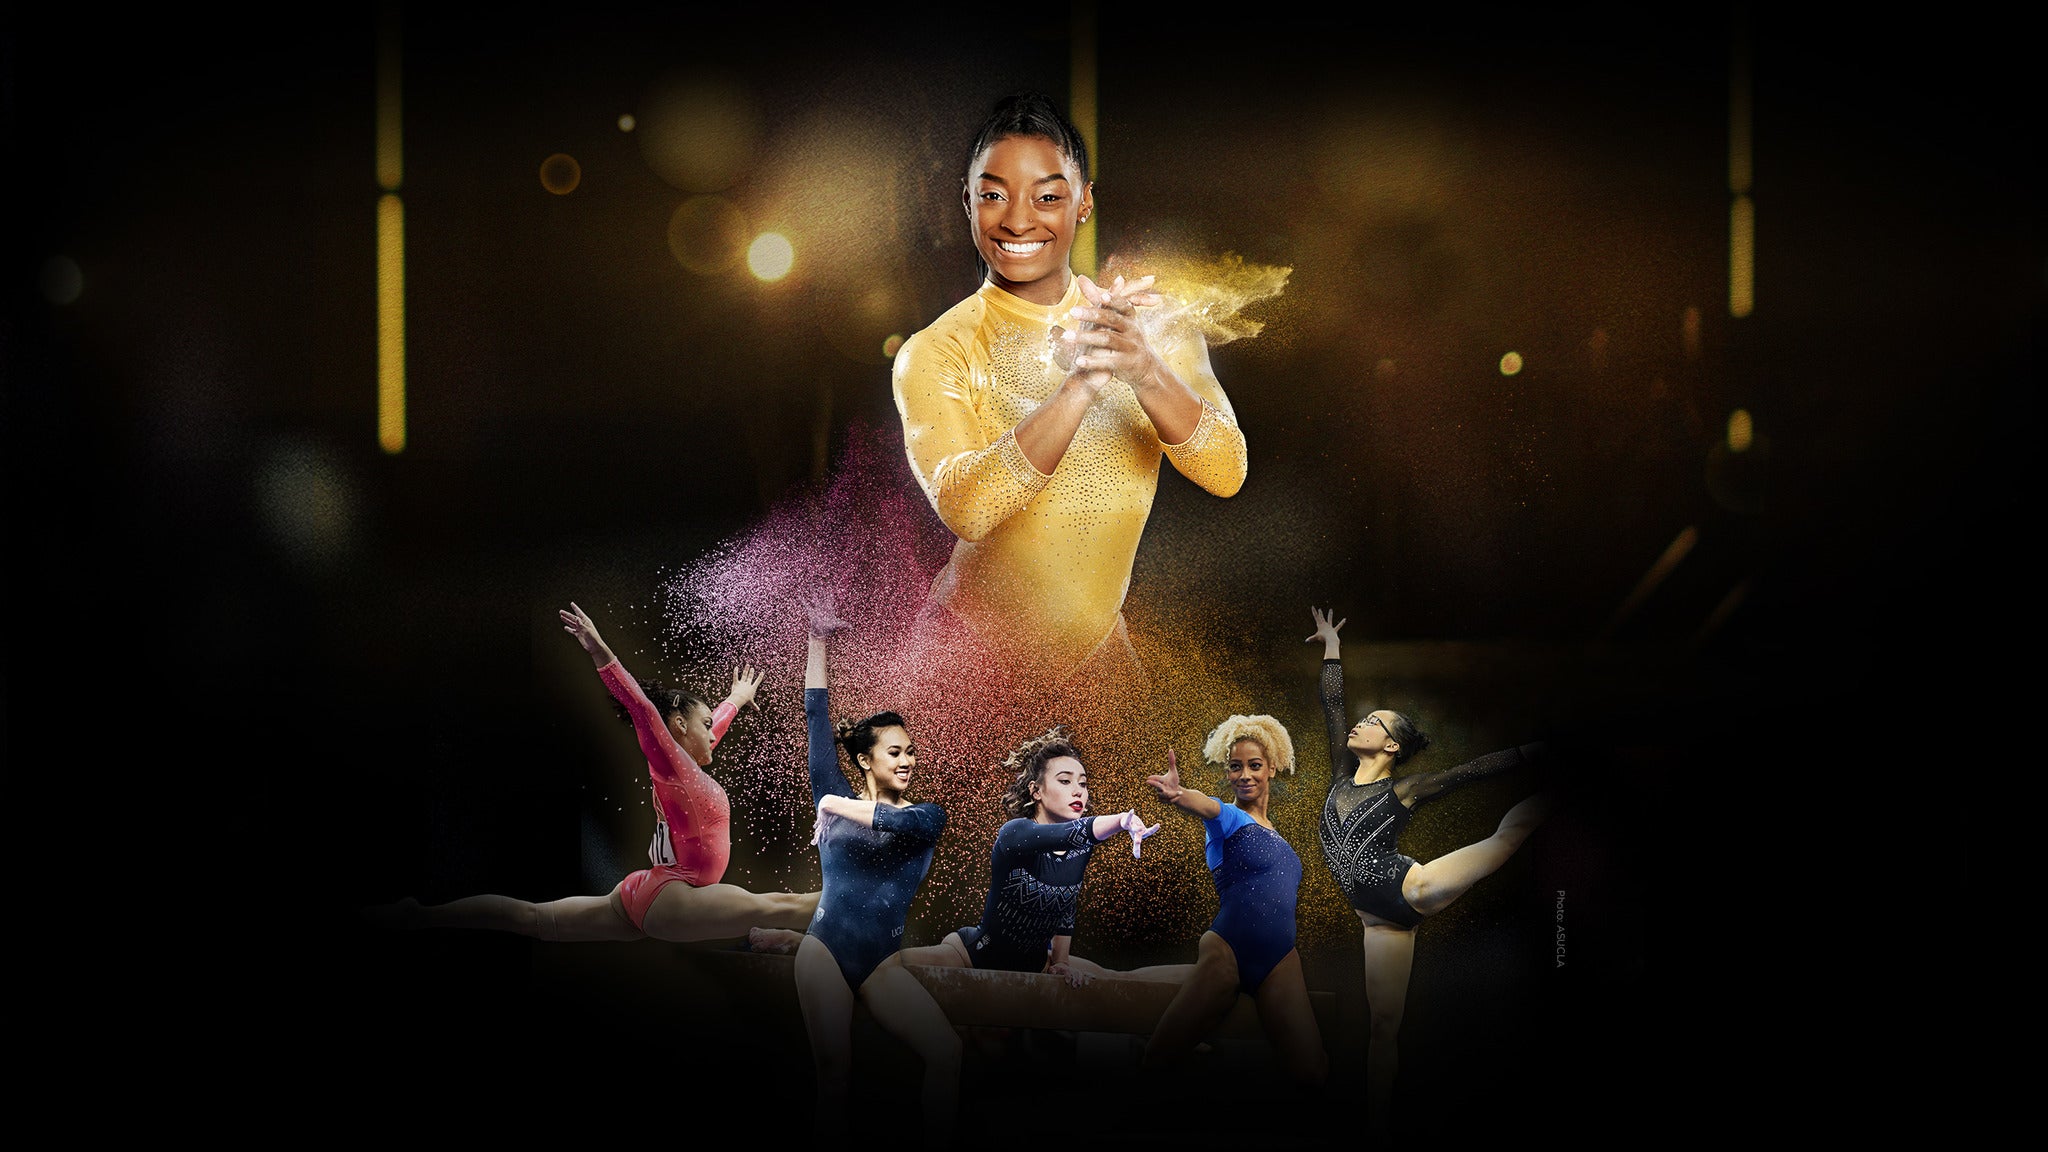 G.O.A.T. Gold Over America Tour Starring Simone Biles in North Little Rock promo photo for VIP Package presale offer code